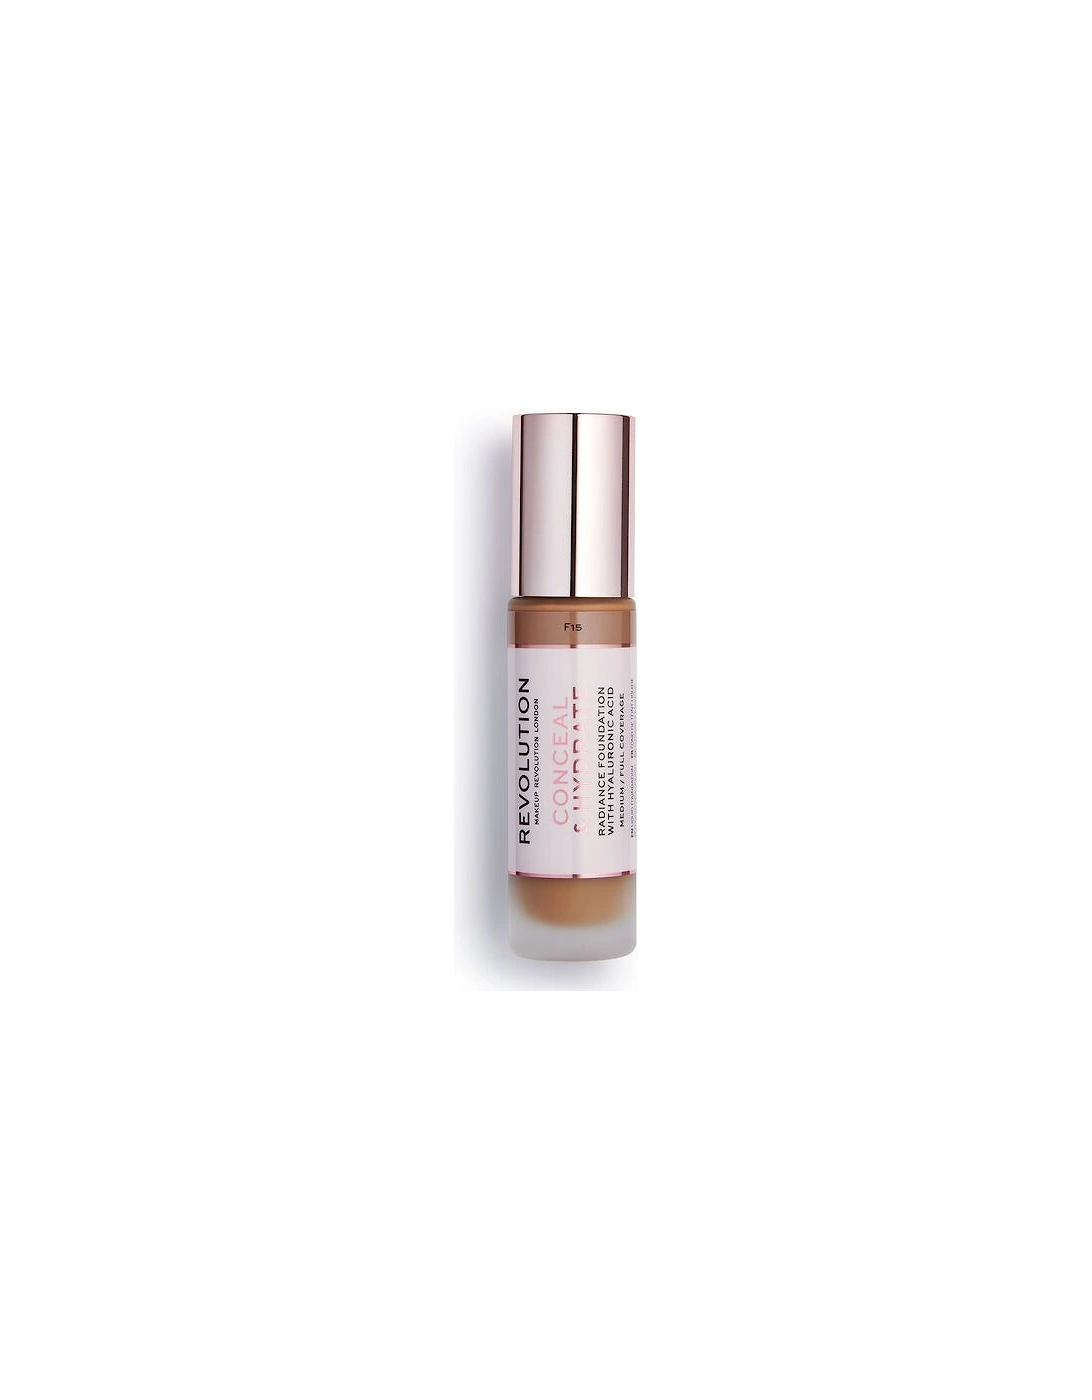 Conceal & Hydrate Foundation F15, 2 of 1